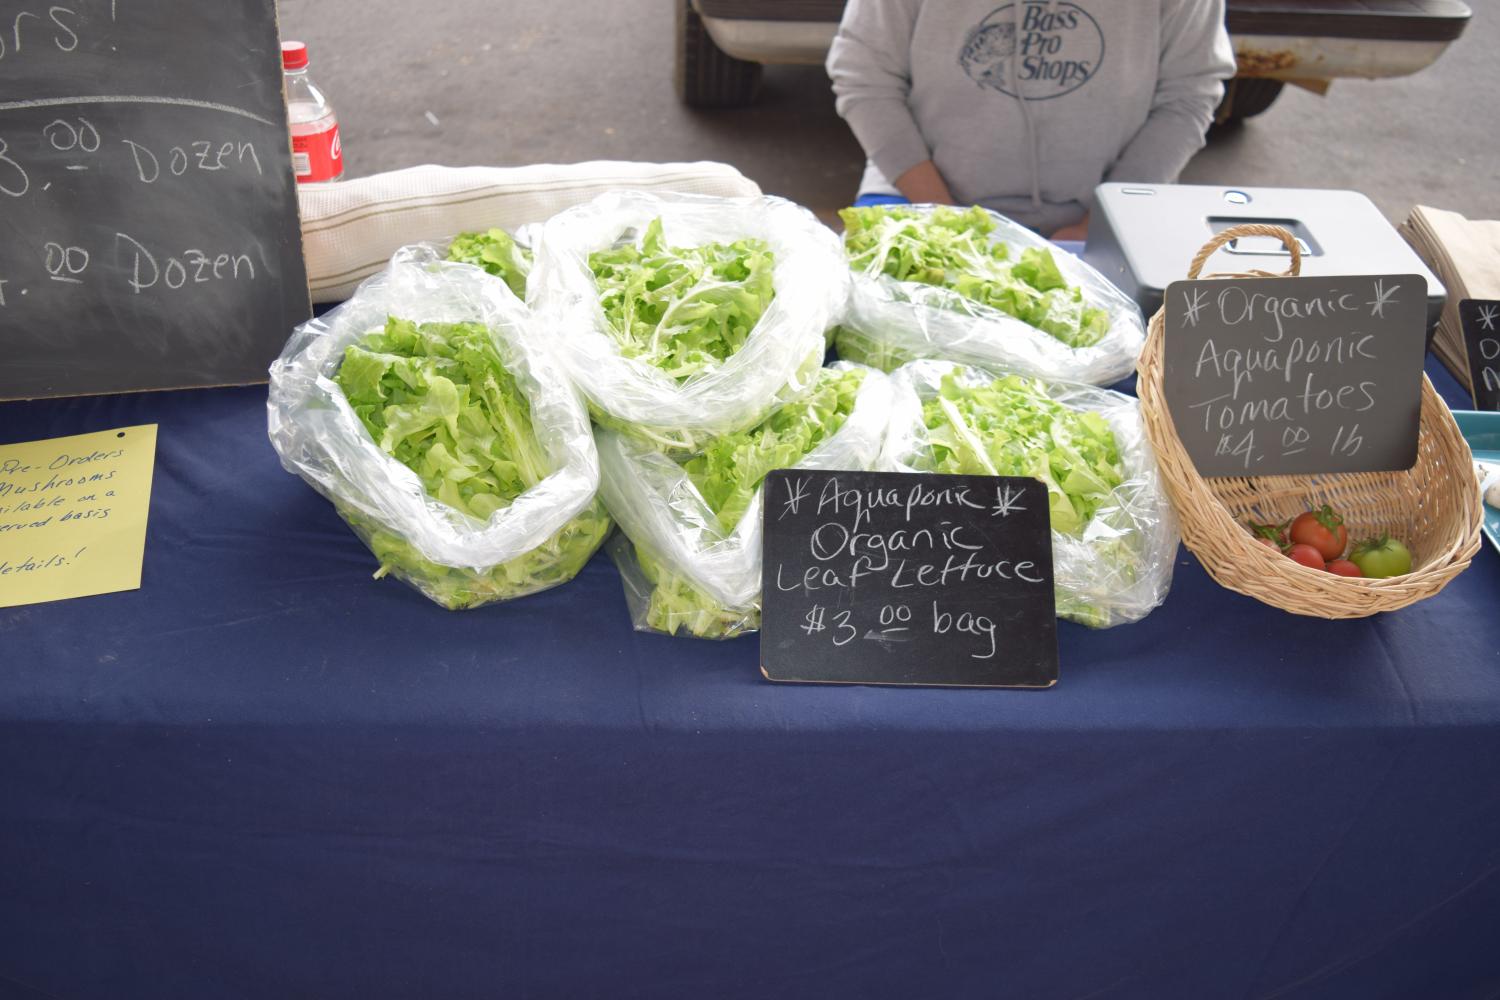 Throughout the winter and spring Wheatley sells fresh organic produce grown by the aquaponic method.Some of their wares include fresh lettuces, radishes,tomatoes, and several types of mushrooms.